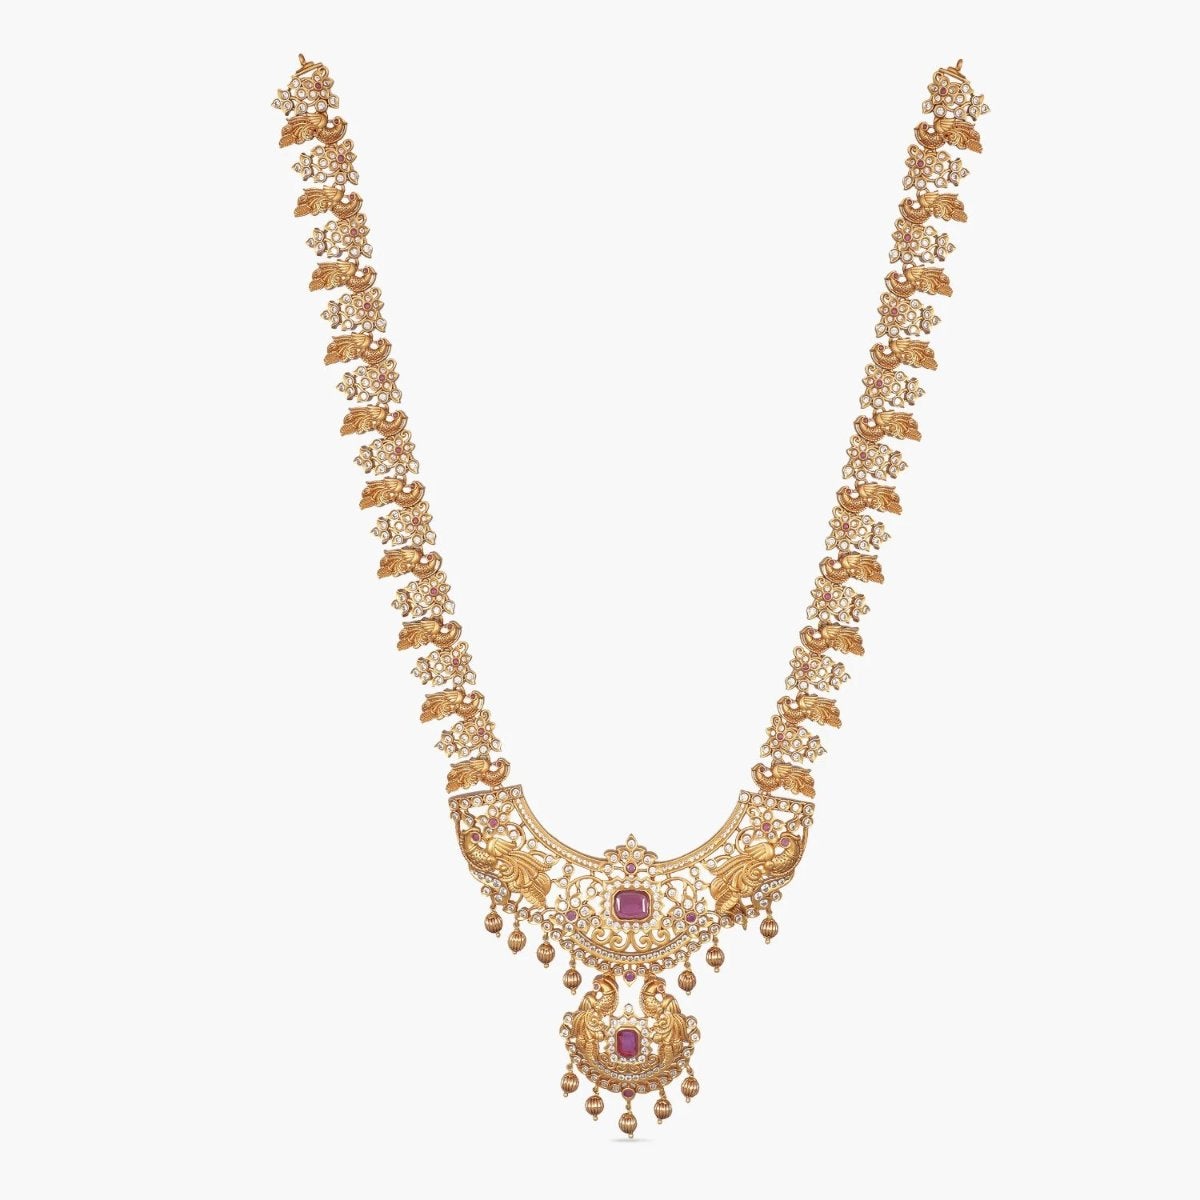 Radha Antique Long Necklace